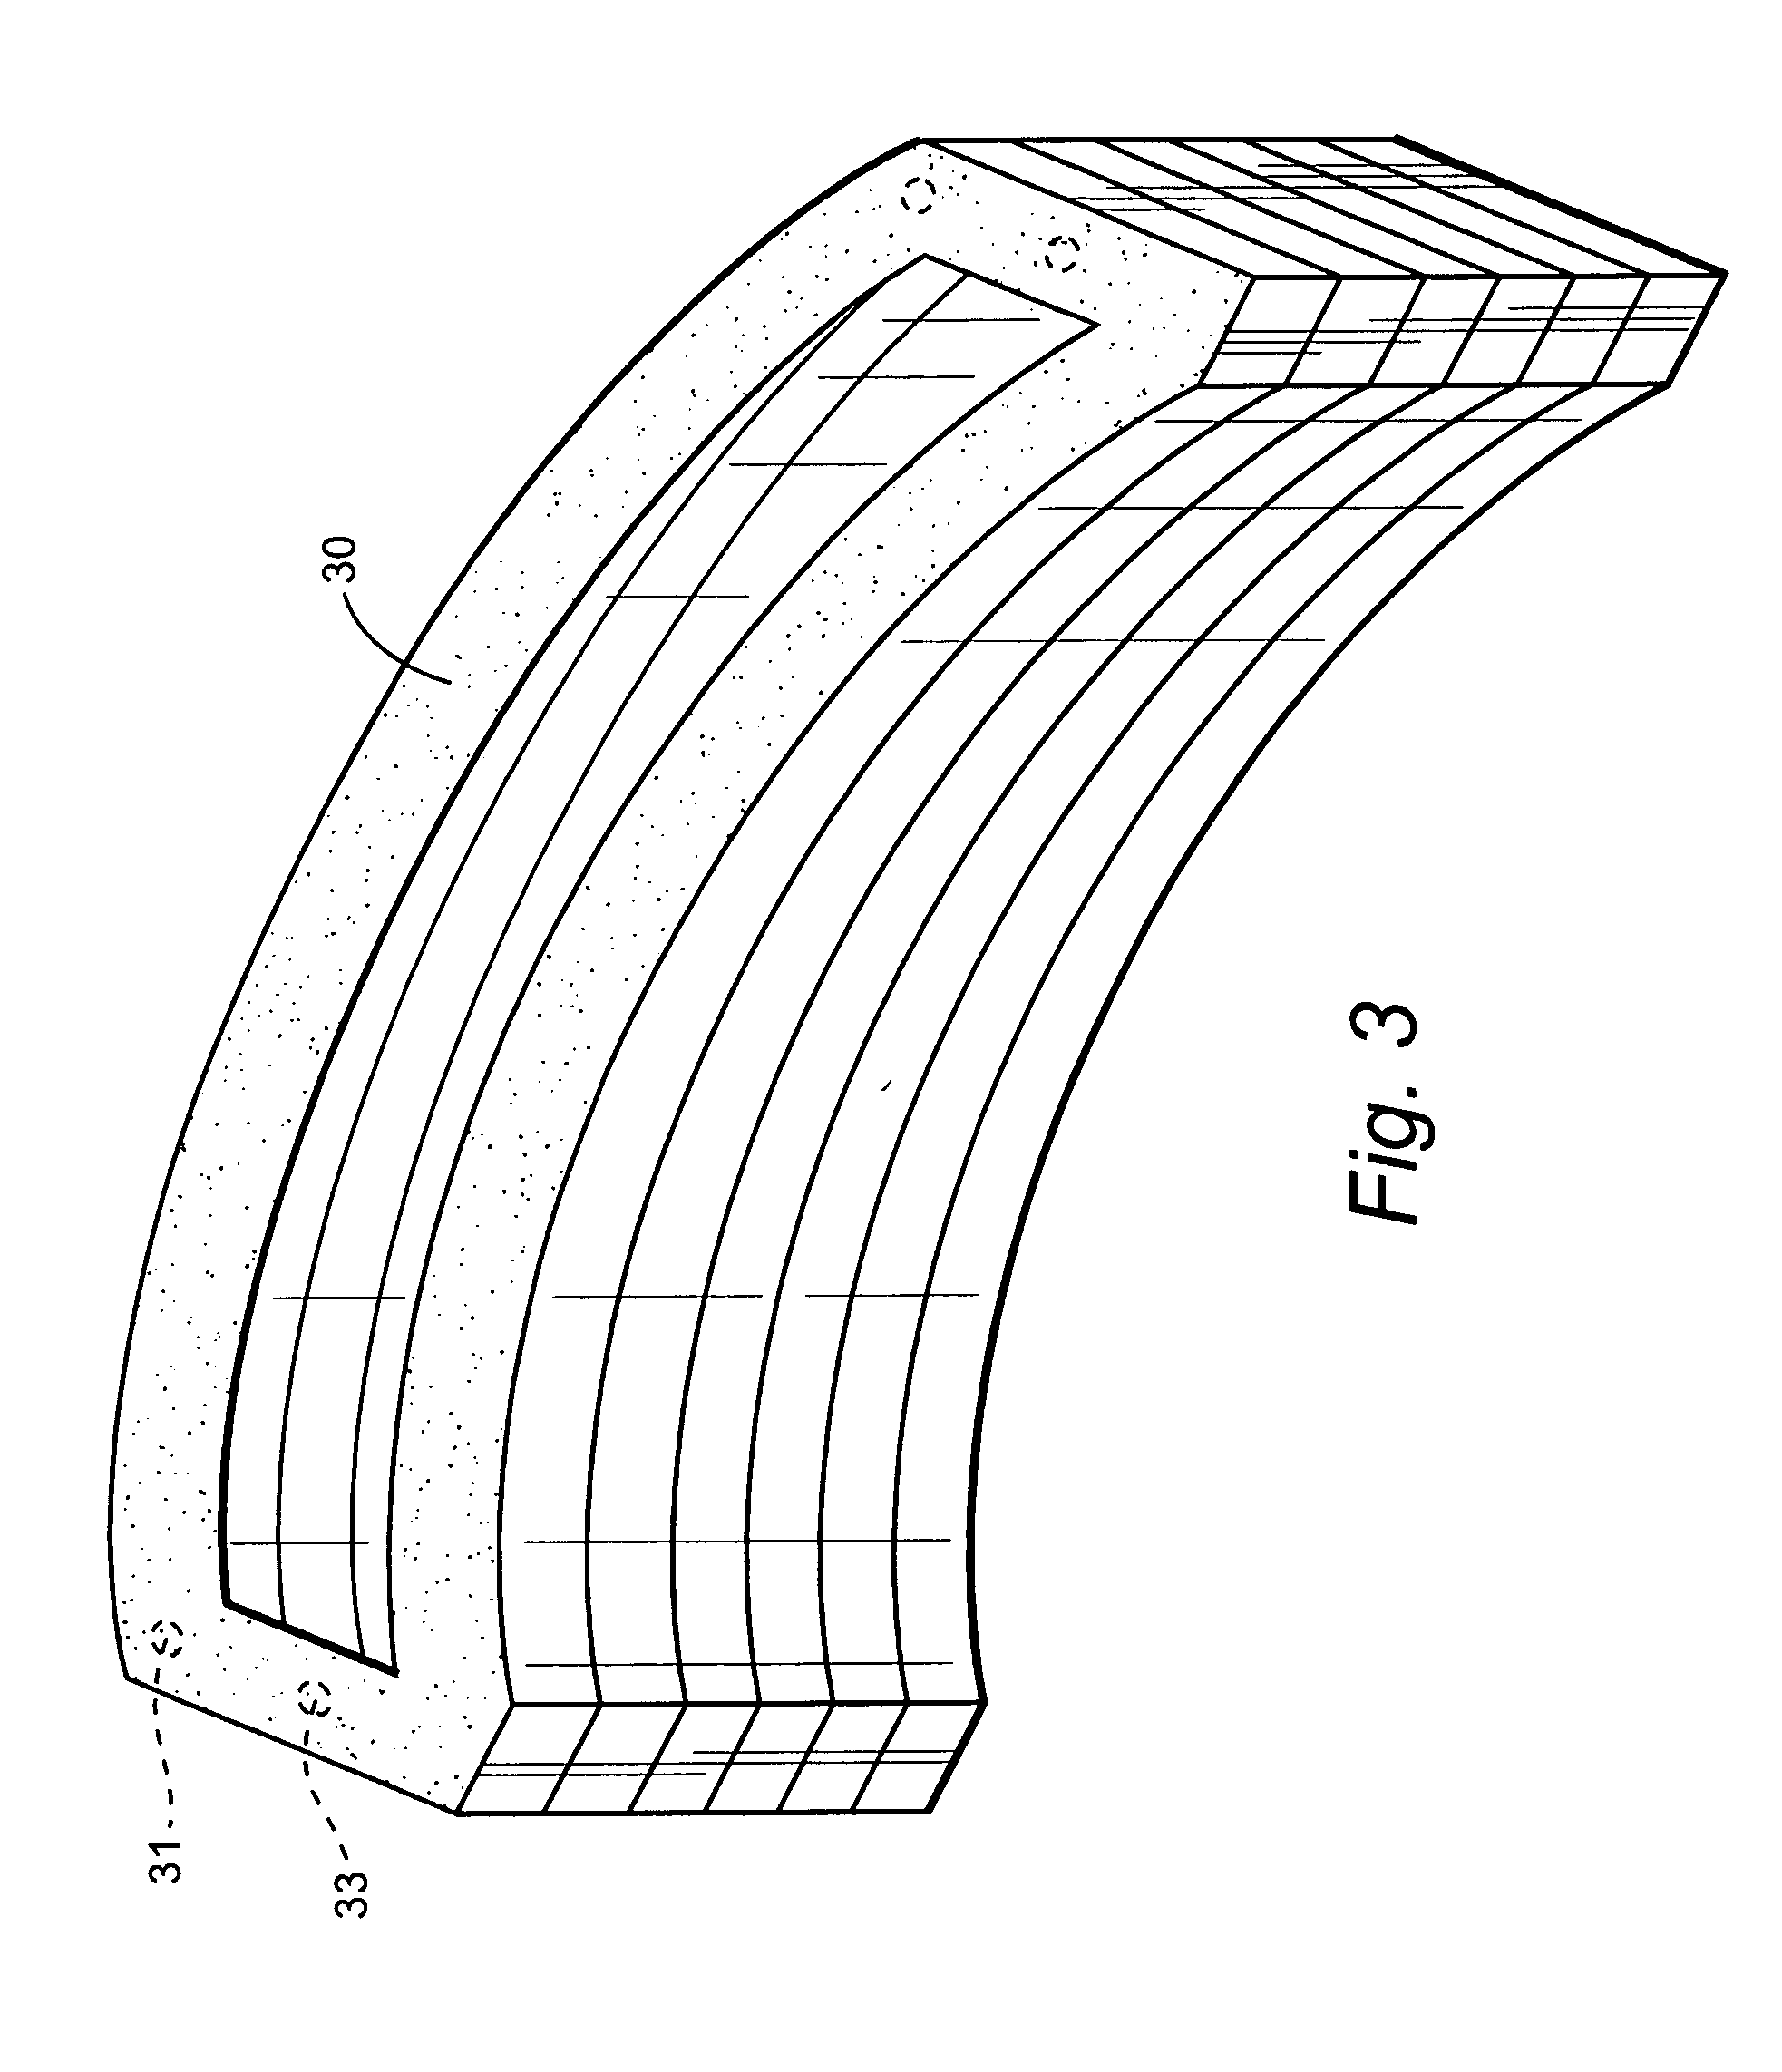 Methods of manufacturing a segmented brush seal for sealing between stationary and rotary components